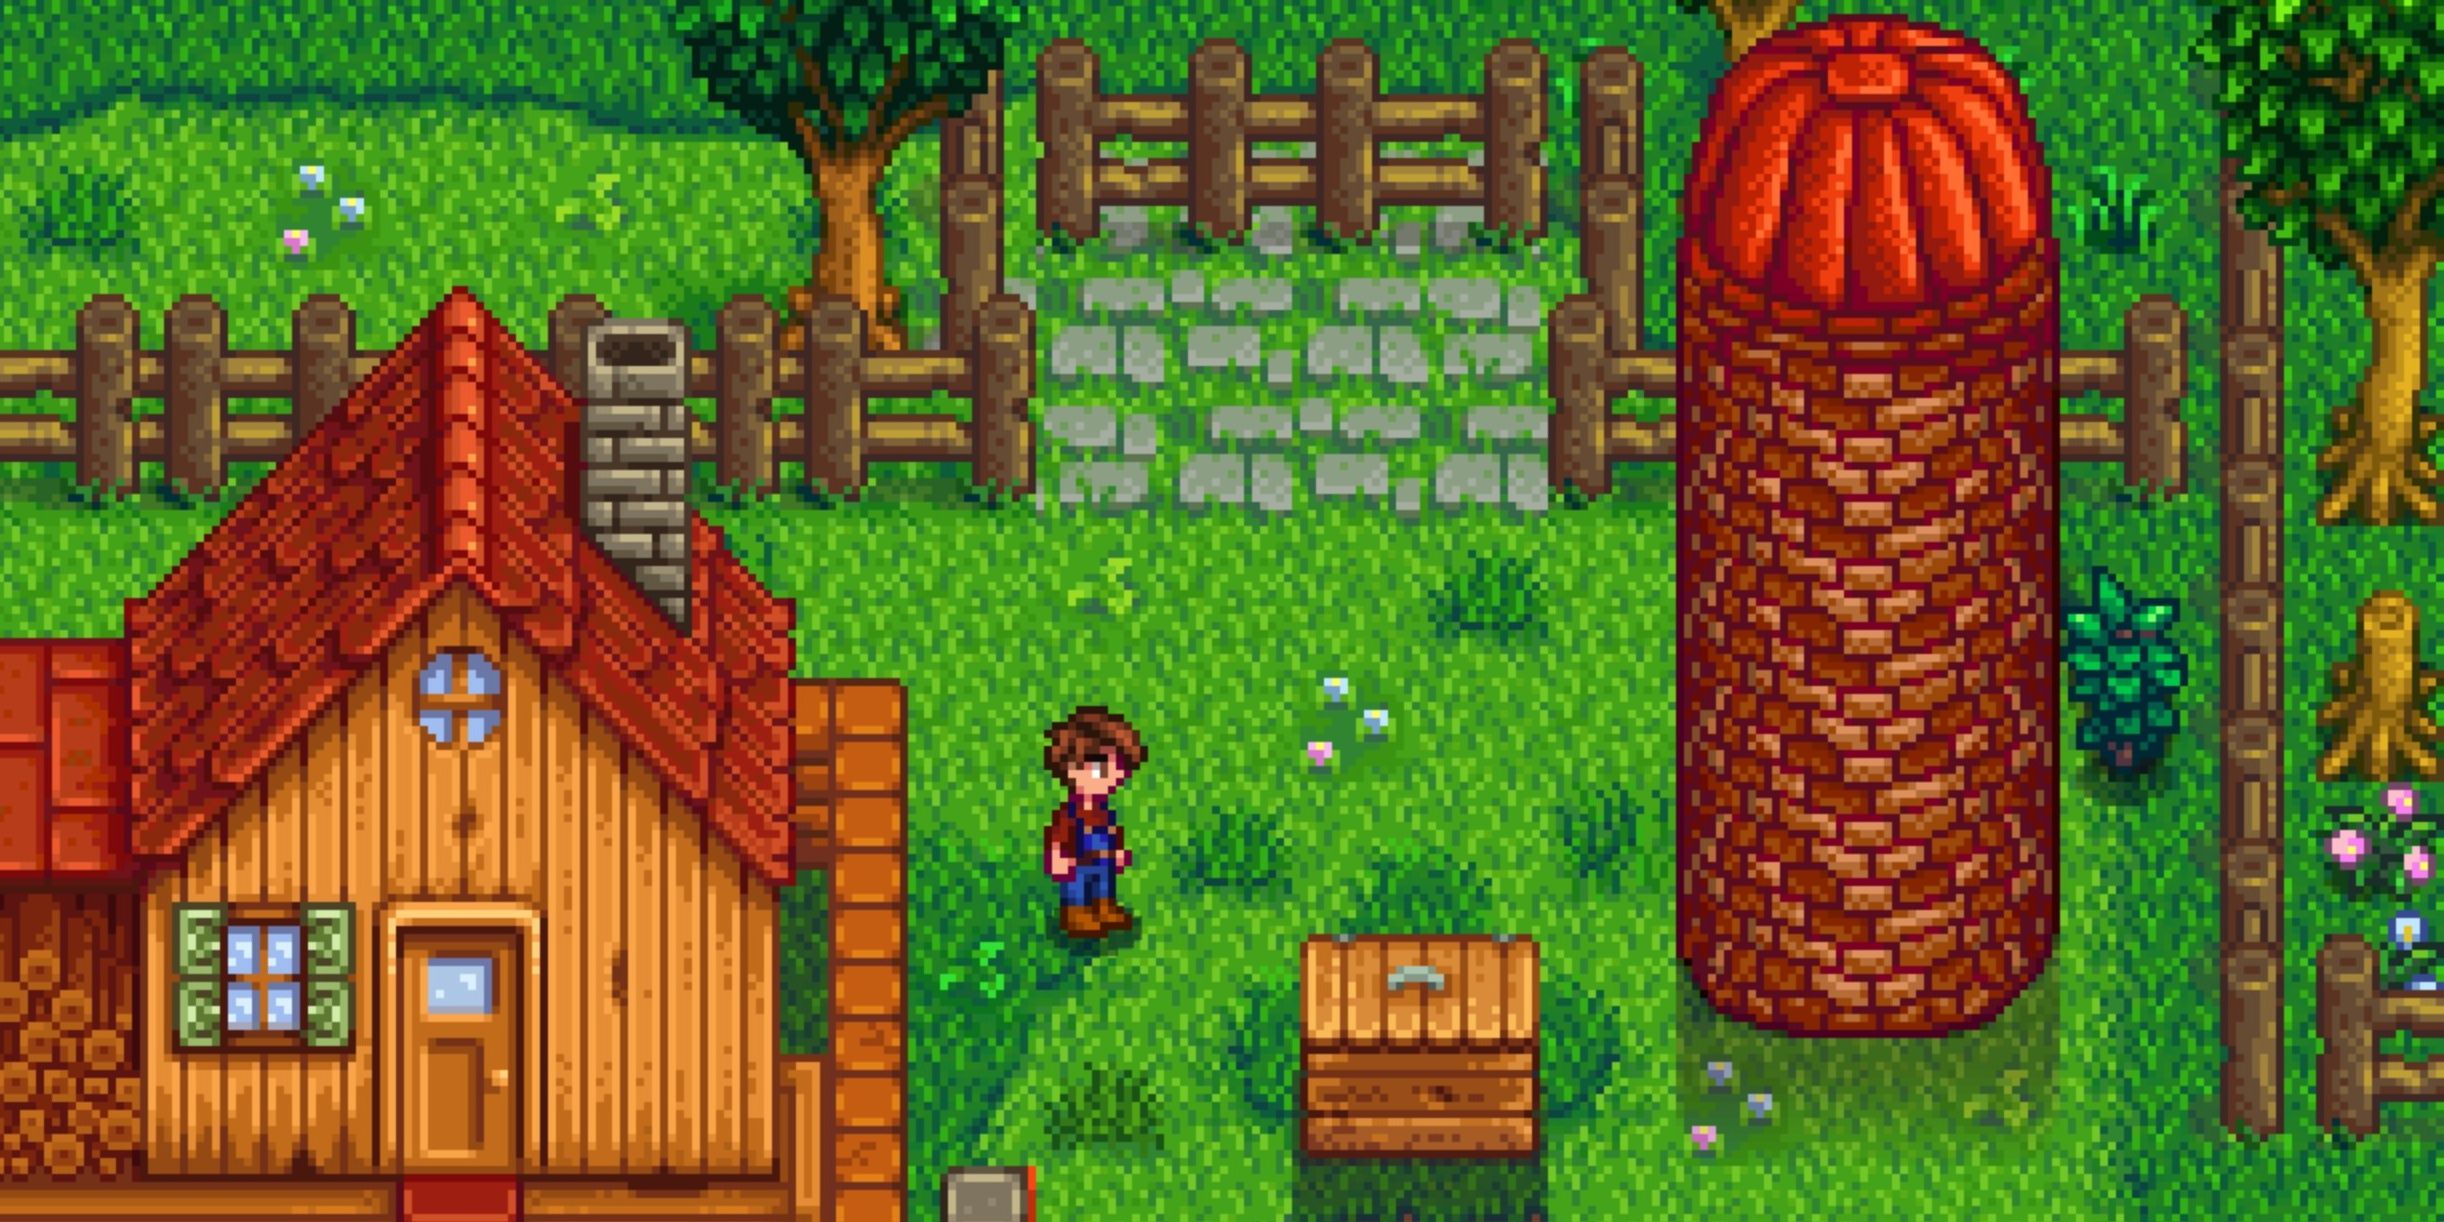 The player stares at a silo sat to the right of the house on the Farm.